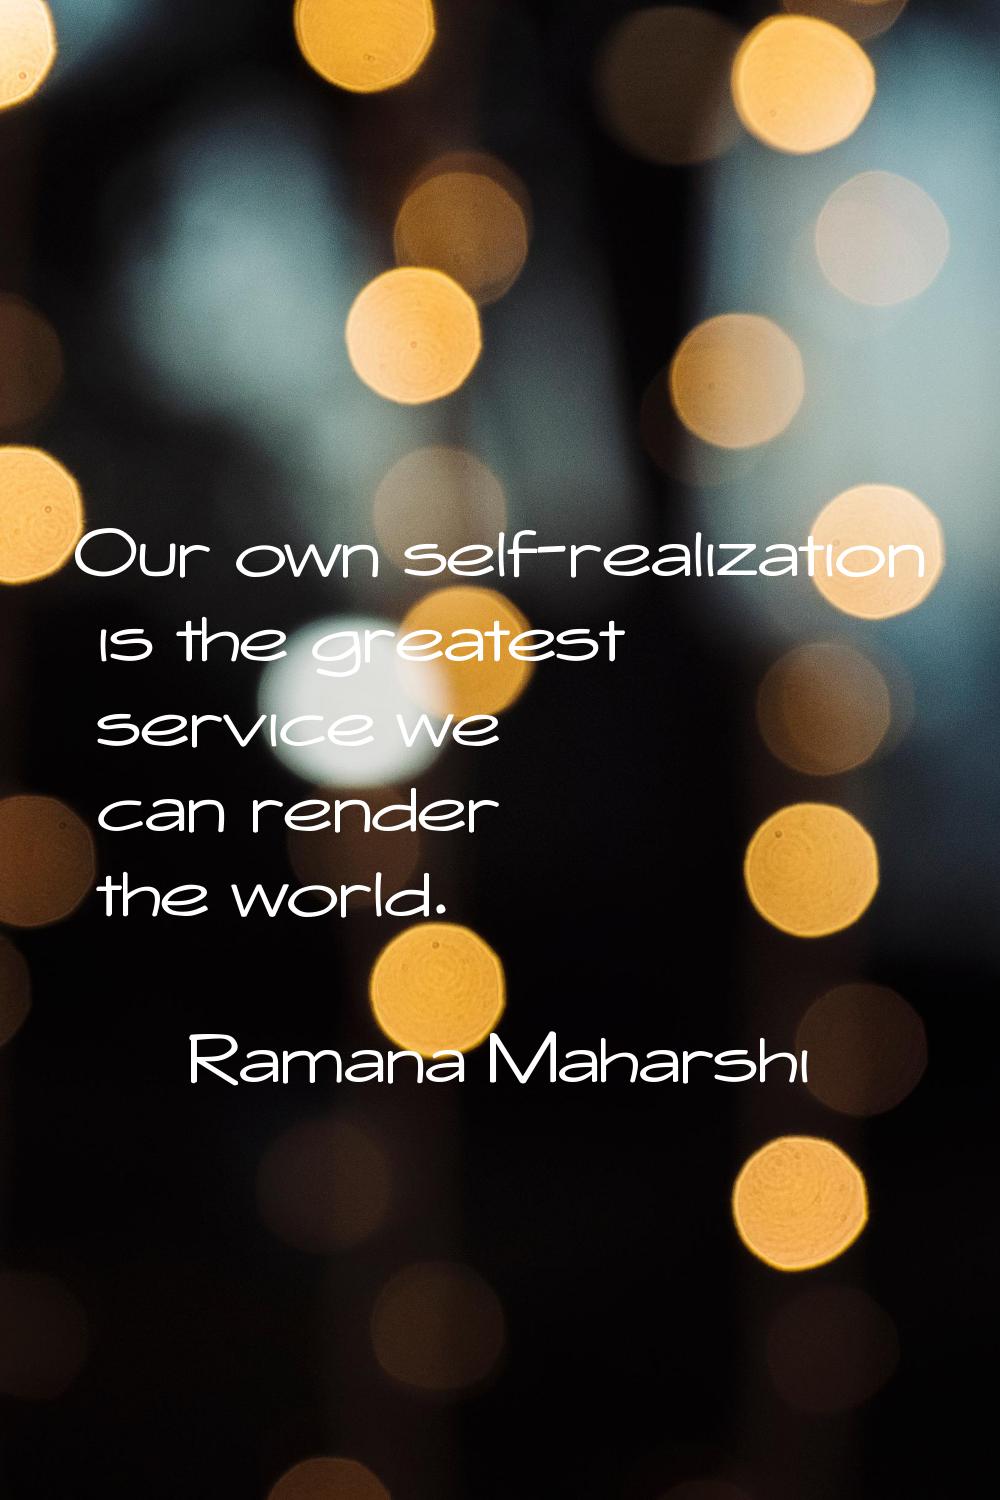 Our own self-realization is the greatest service we can render the world.